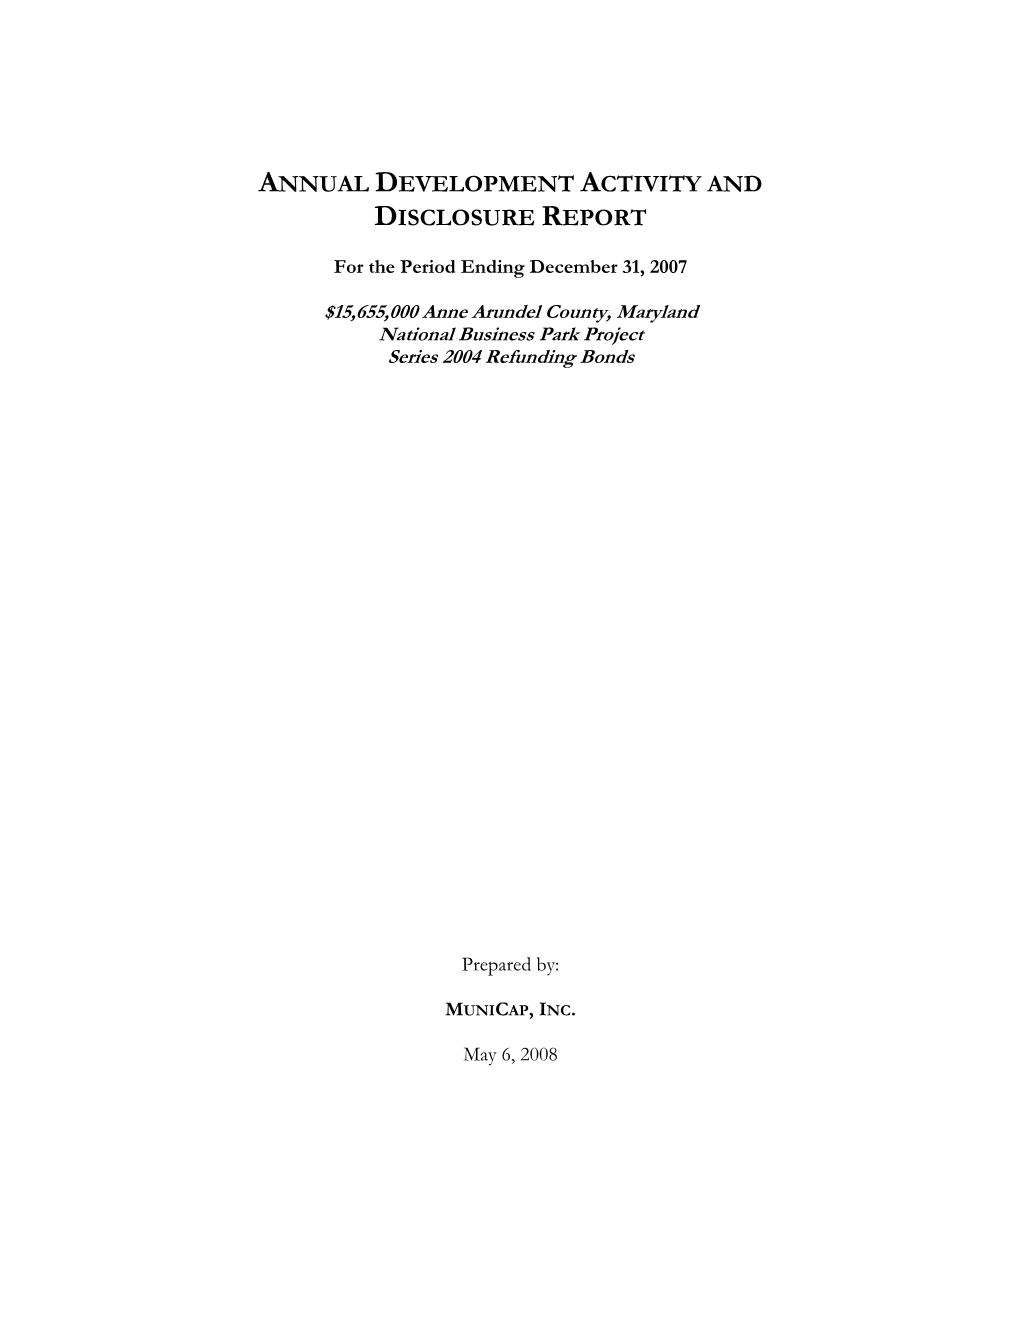 Annual Development Activity and Disclosure Report